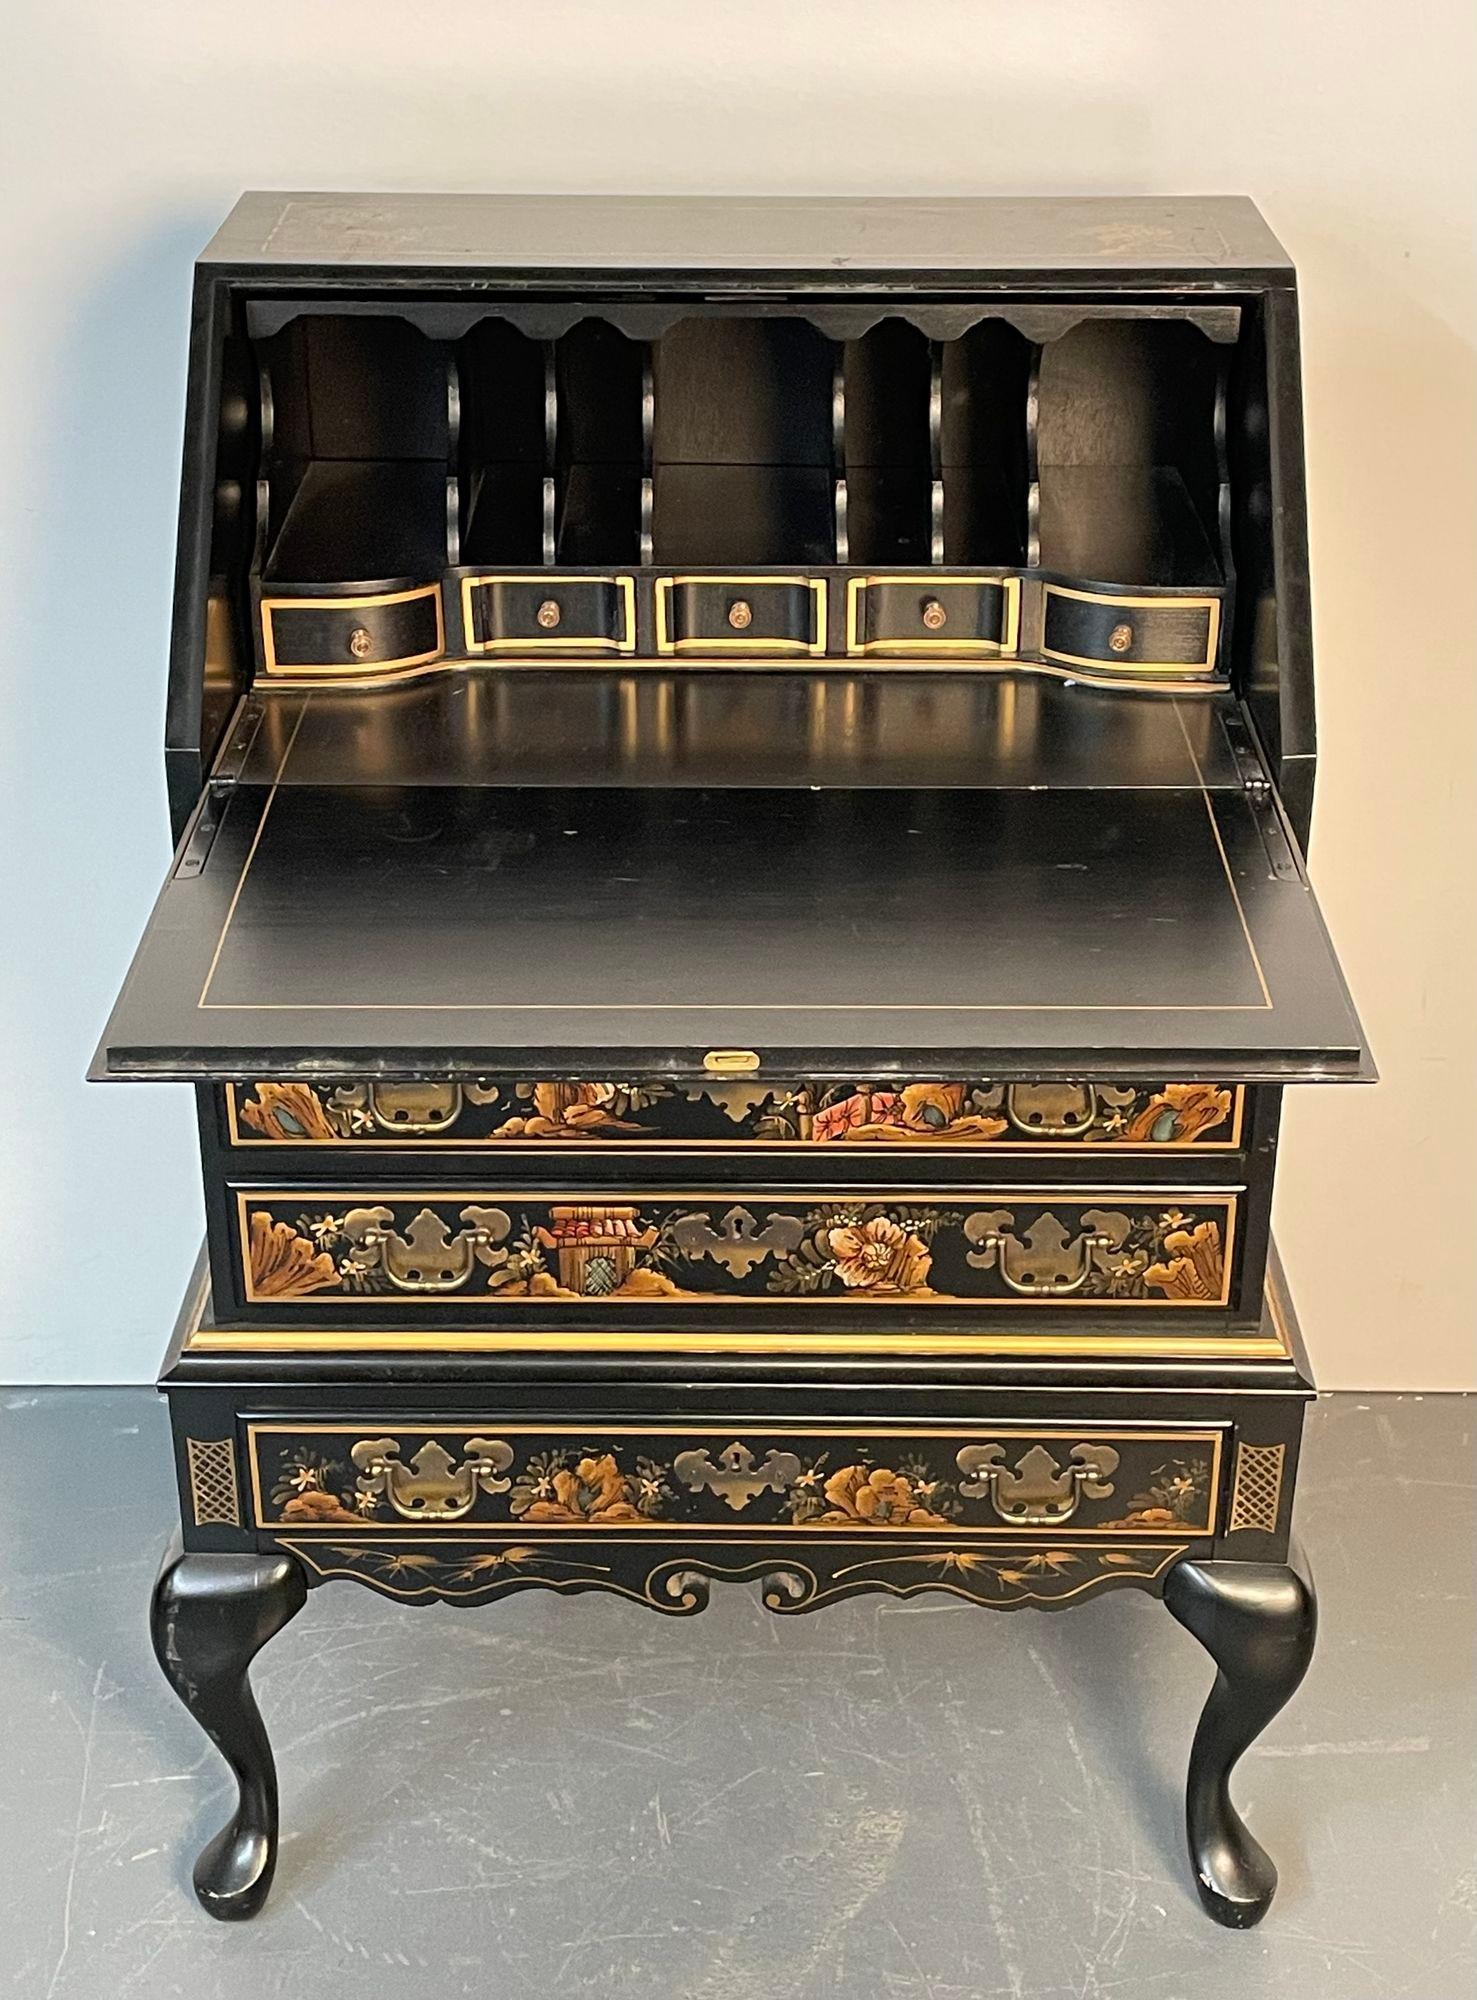 20th Century Chinoiserie Slant Front Writing Desk / Cabinet, Chinese Motif, Slant Front